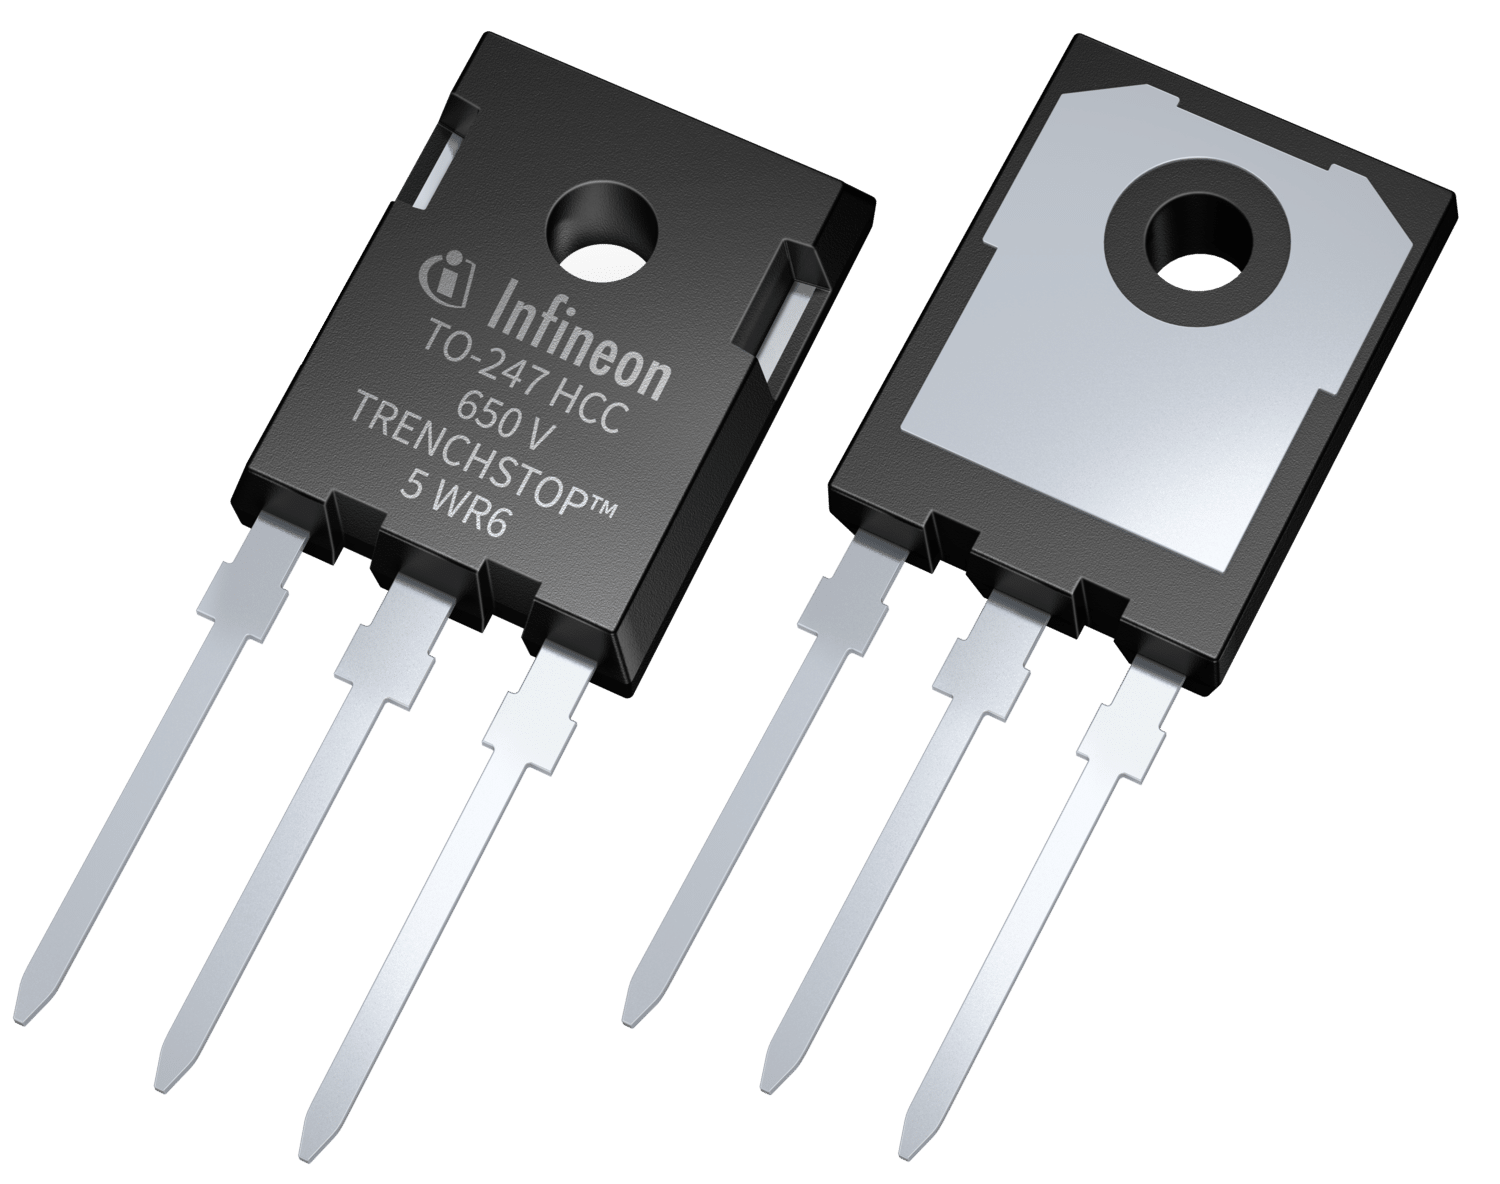 Infineon Technologies Introduces TRENCHSTOP 5 WR6 family in a TO-247-3-HCC housing